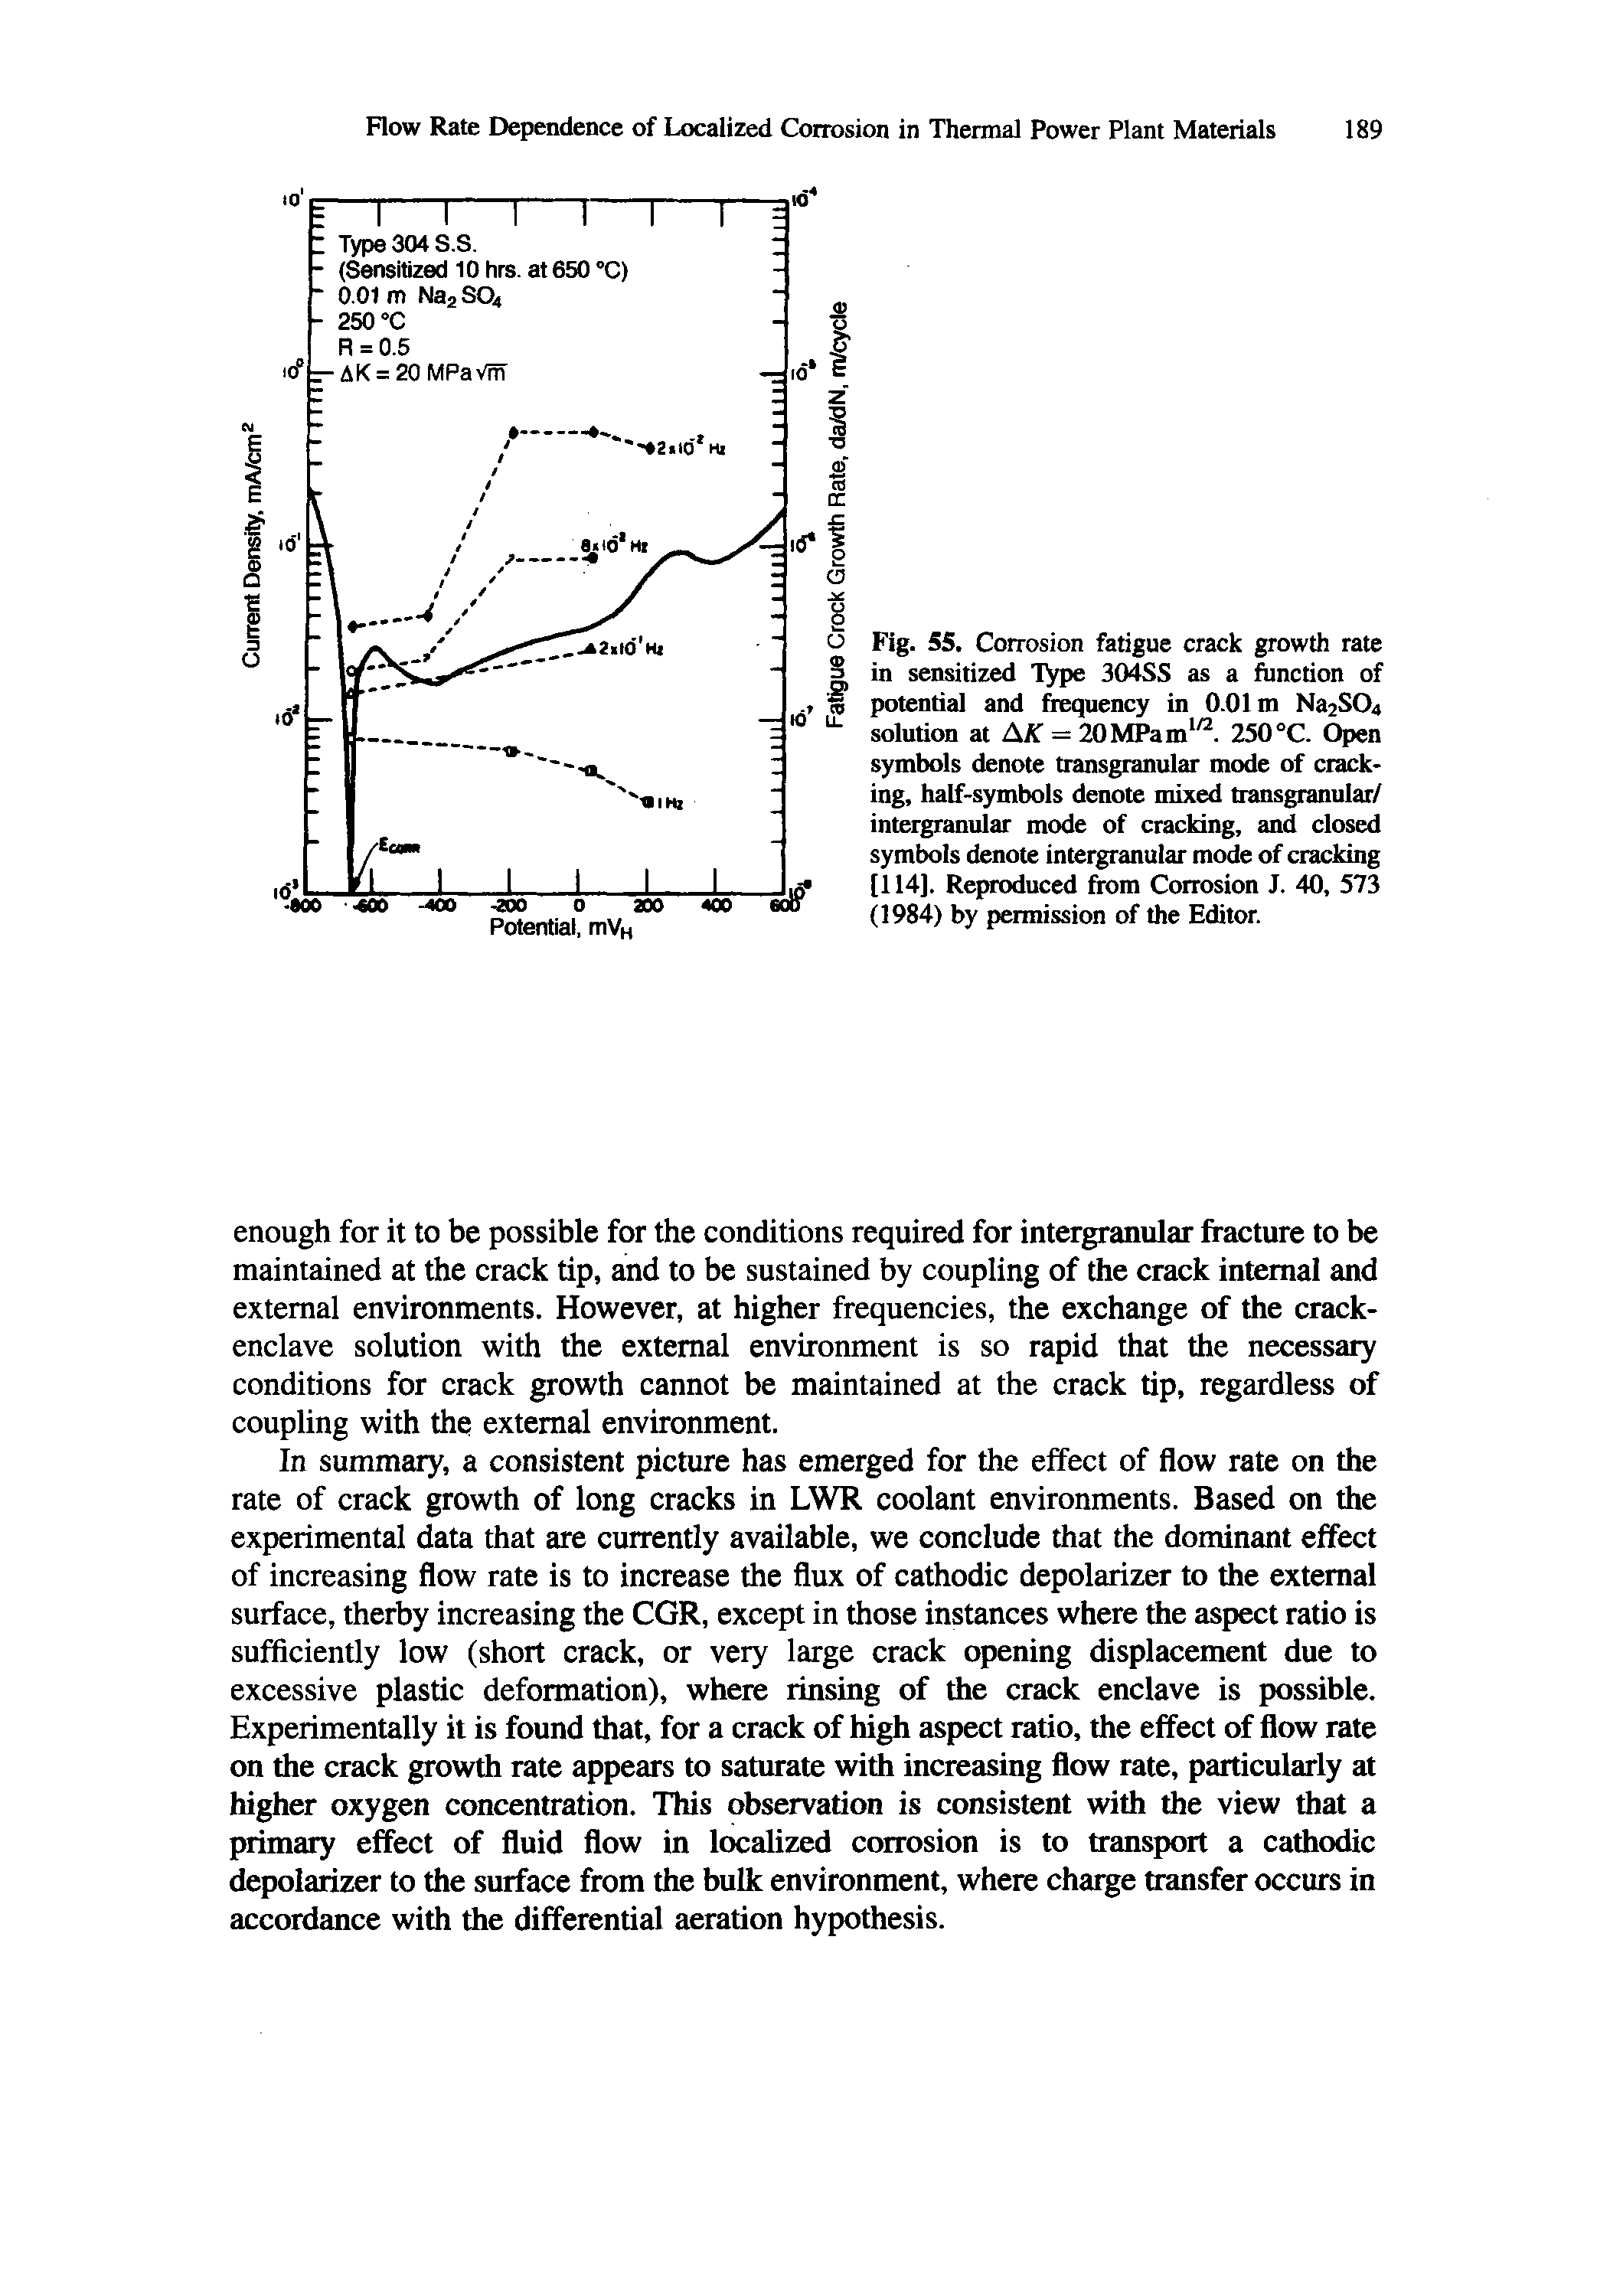 Fig. 55. Corrosion fatigue crack growth rate in sensitized Type 304SS as a function of potential and frequency in 0.01m Na2S04 solution at AK = 20 MPa m. 250 °C. Open symbols denote transgranular mode of cracking, half-symbols denote mixed transgranular/ intergranular mode of cracking, and closed symbols denote intergranular mode of cracking [114]. Reproduced from Corrosion J. 40, 573 0984) by permission of the Editor.